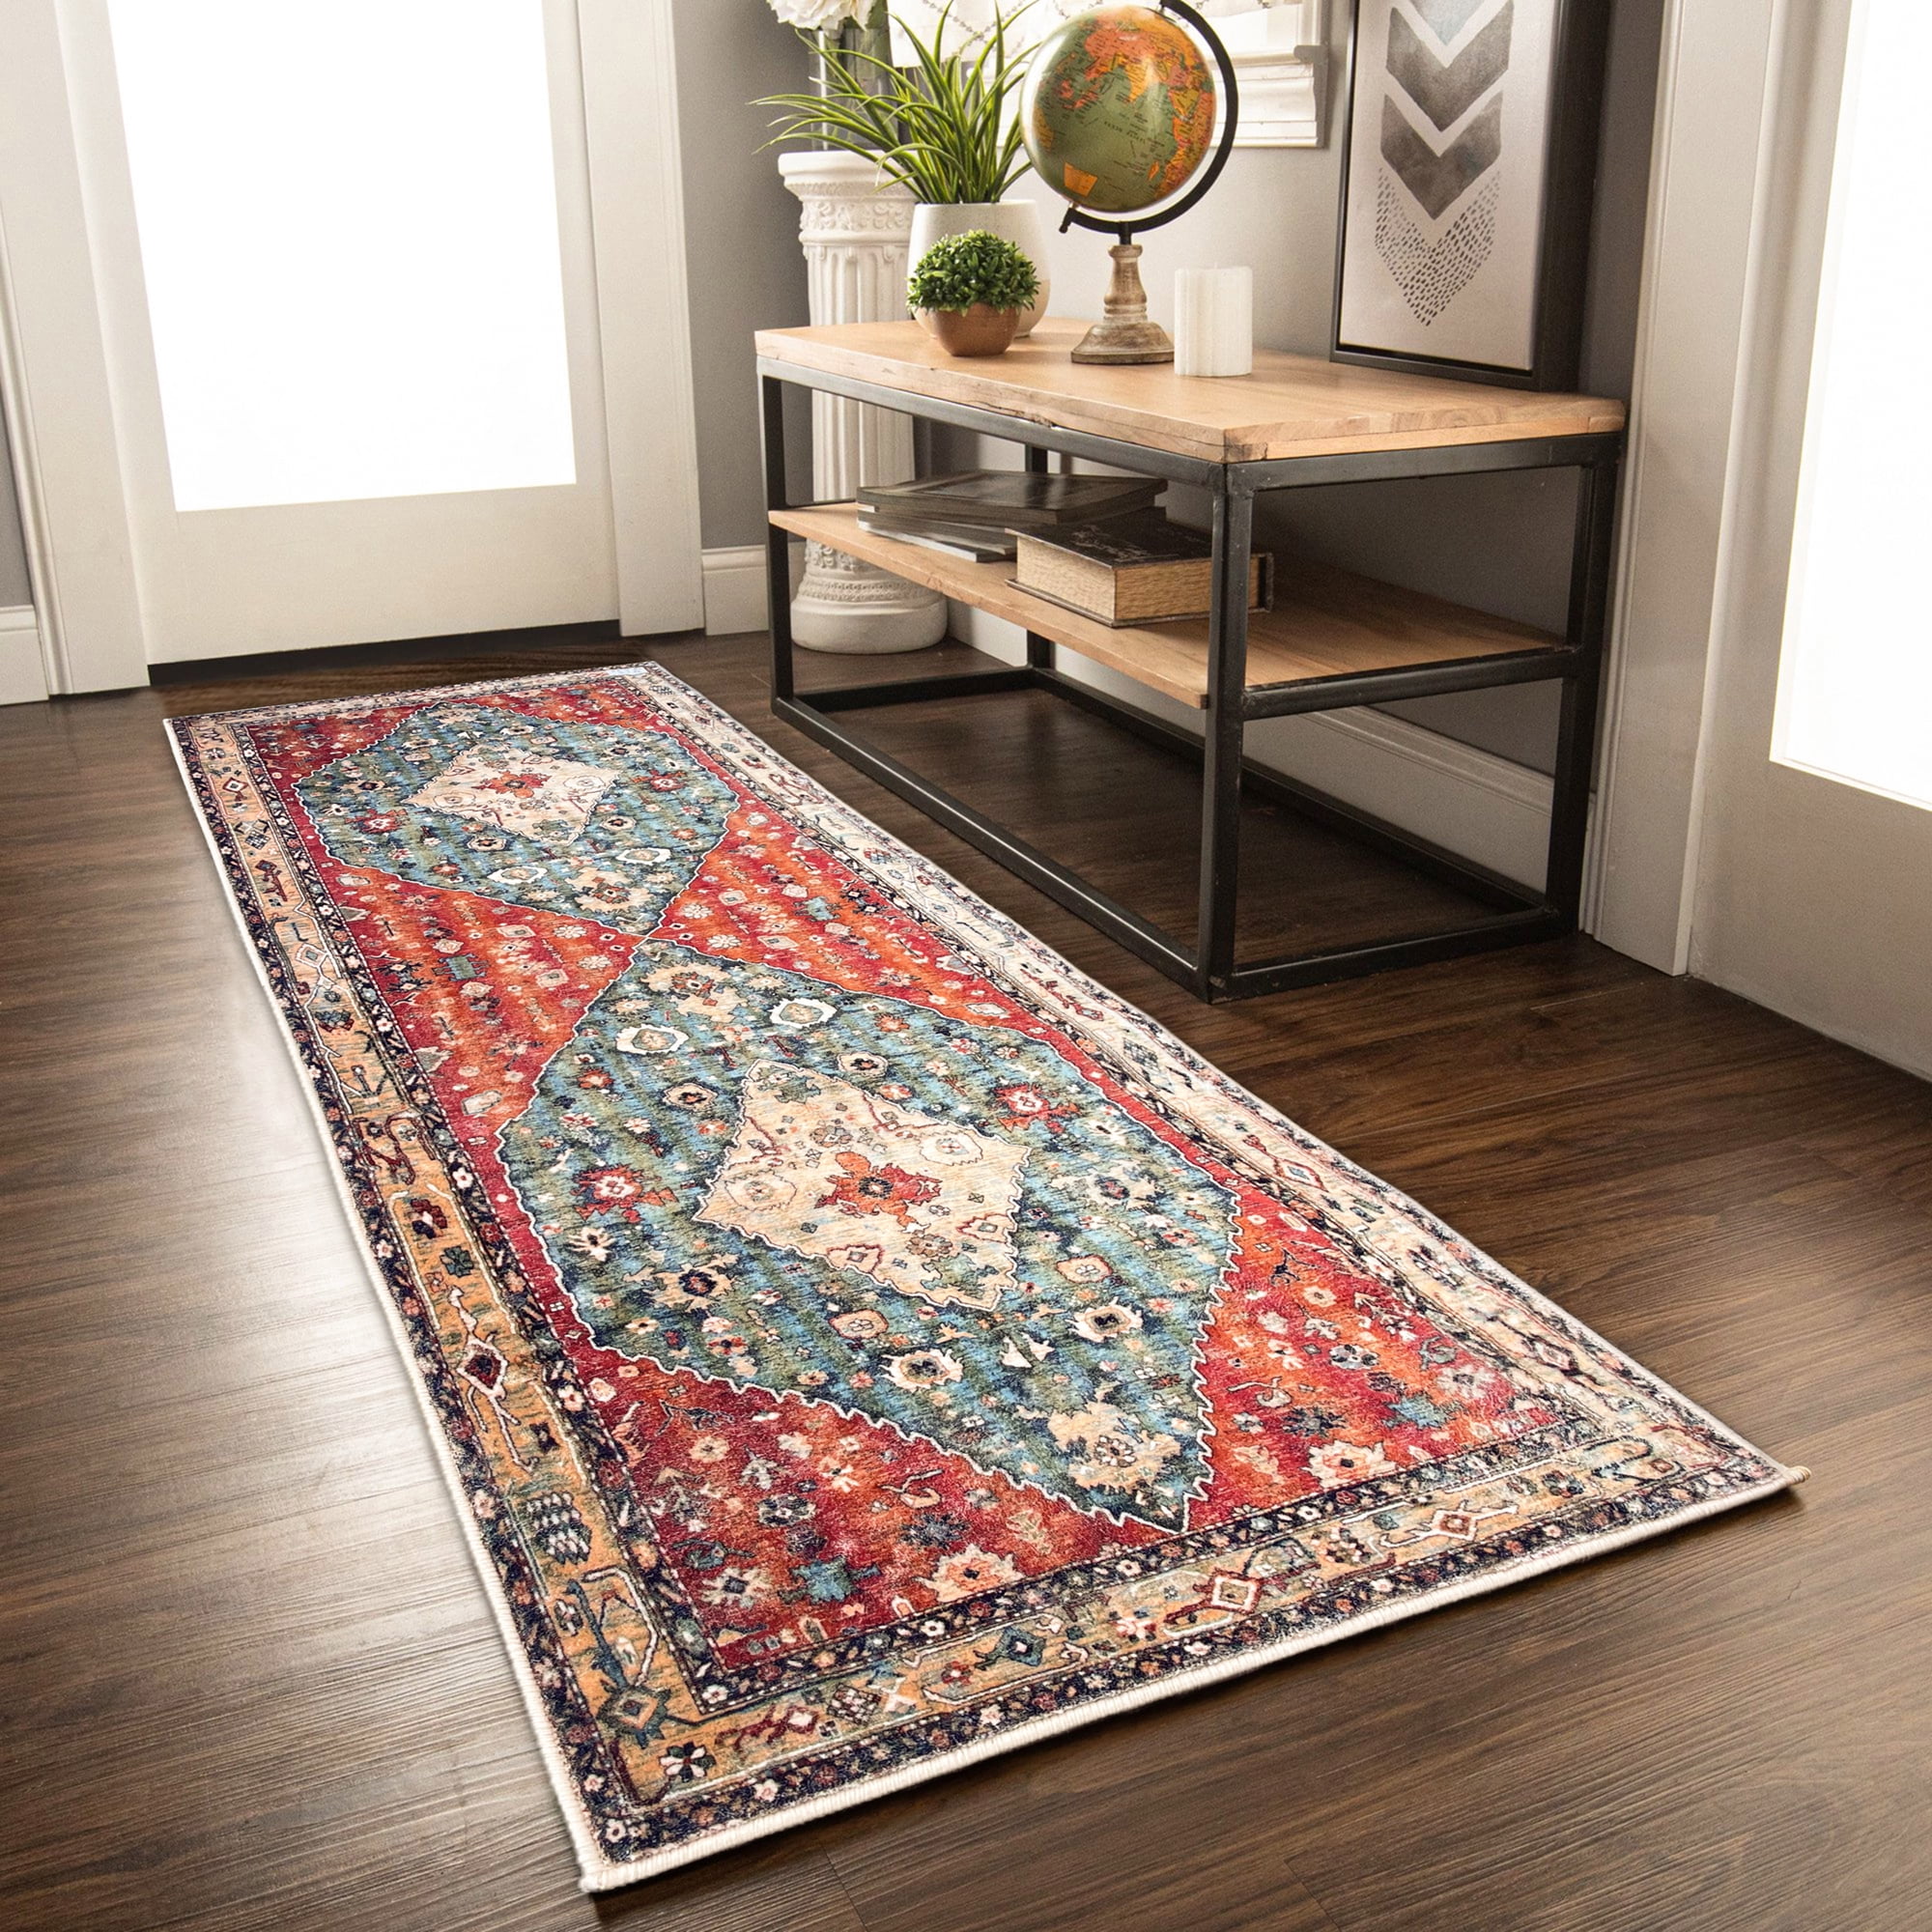 Lahome Boho Entryway Rug - 2x3 Small Throw Kitchen Rugs Washable Area Rugs  for Bedroom Non-Slip Low-Pile Kitchen Mats Black Oriental Indoor Doormat